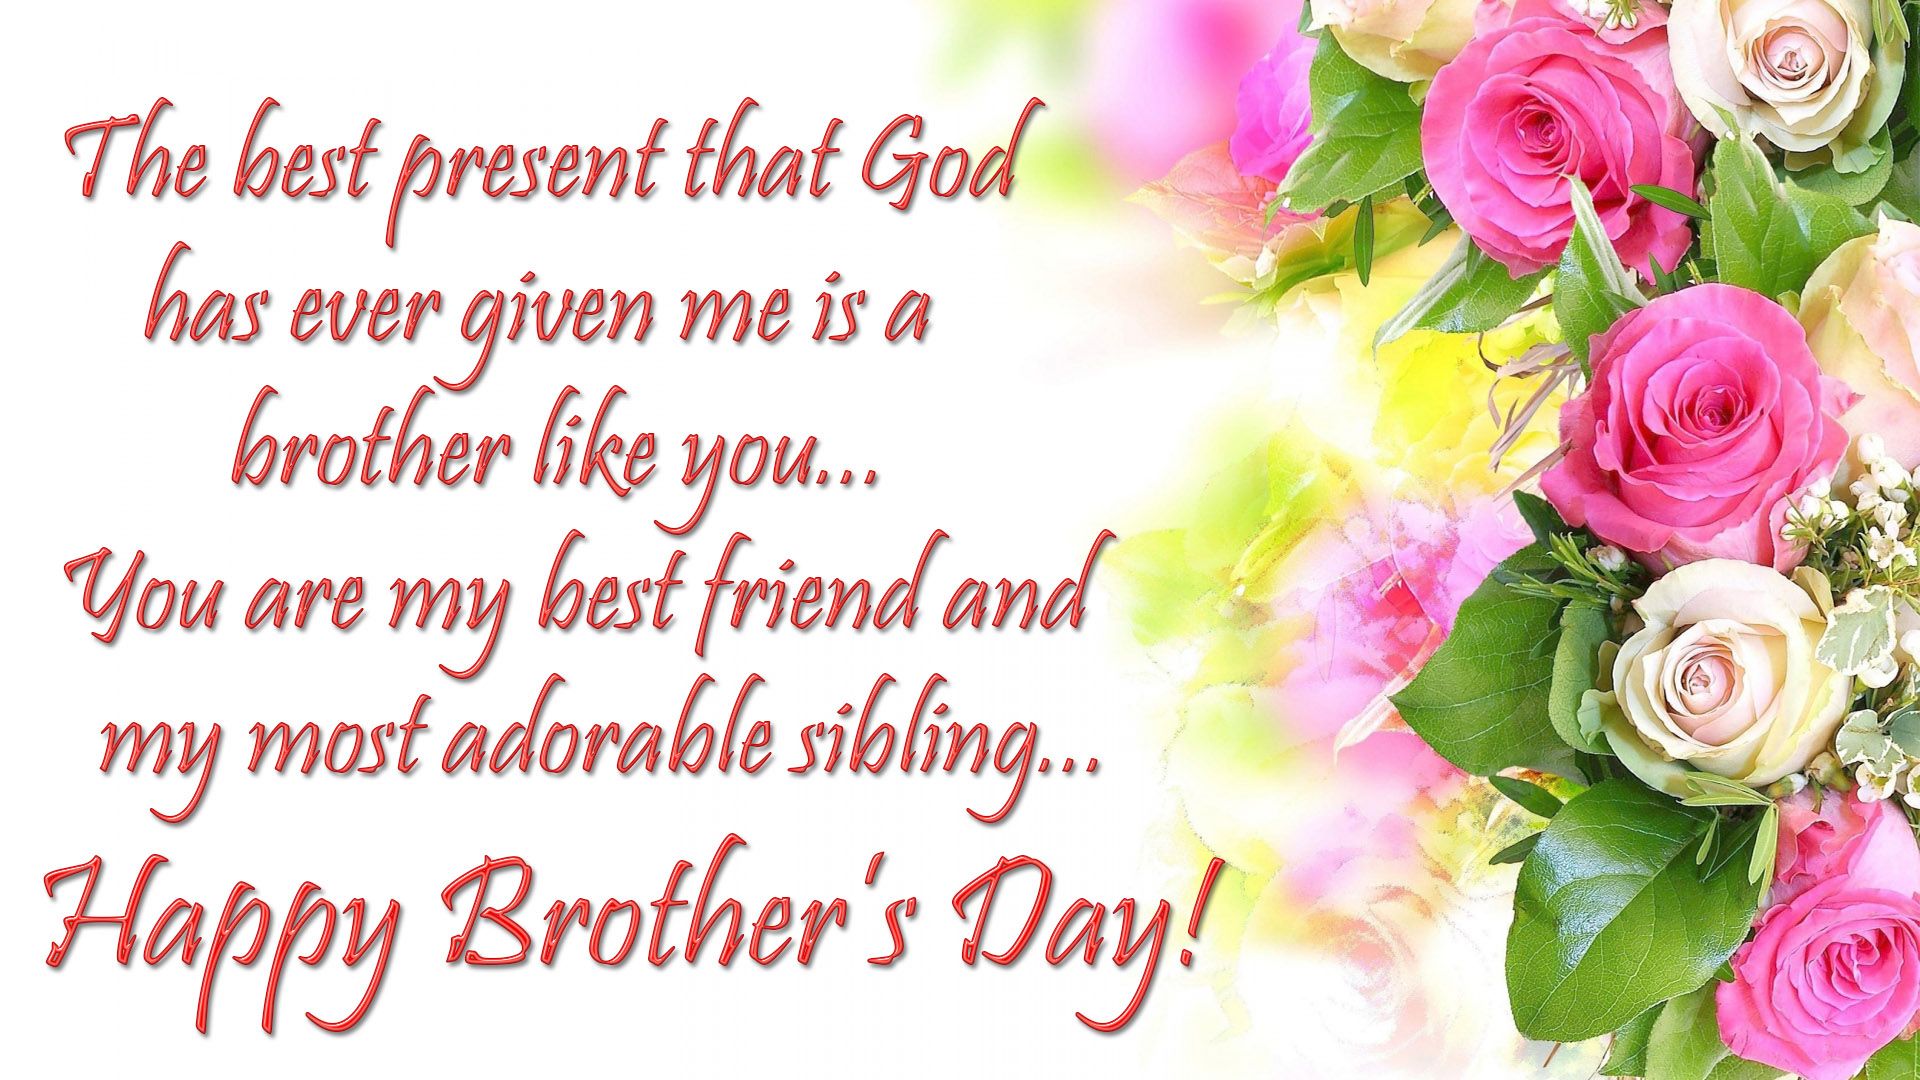 Happy Brothers Day Wishes Messages Image With